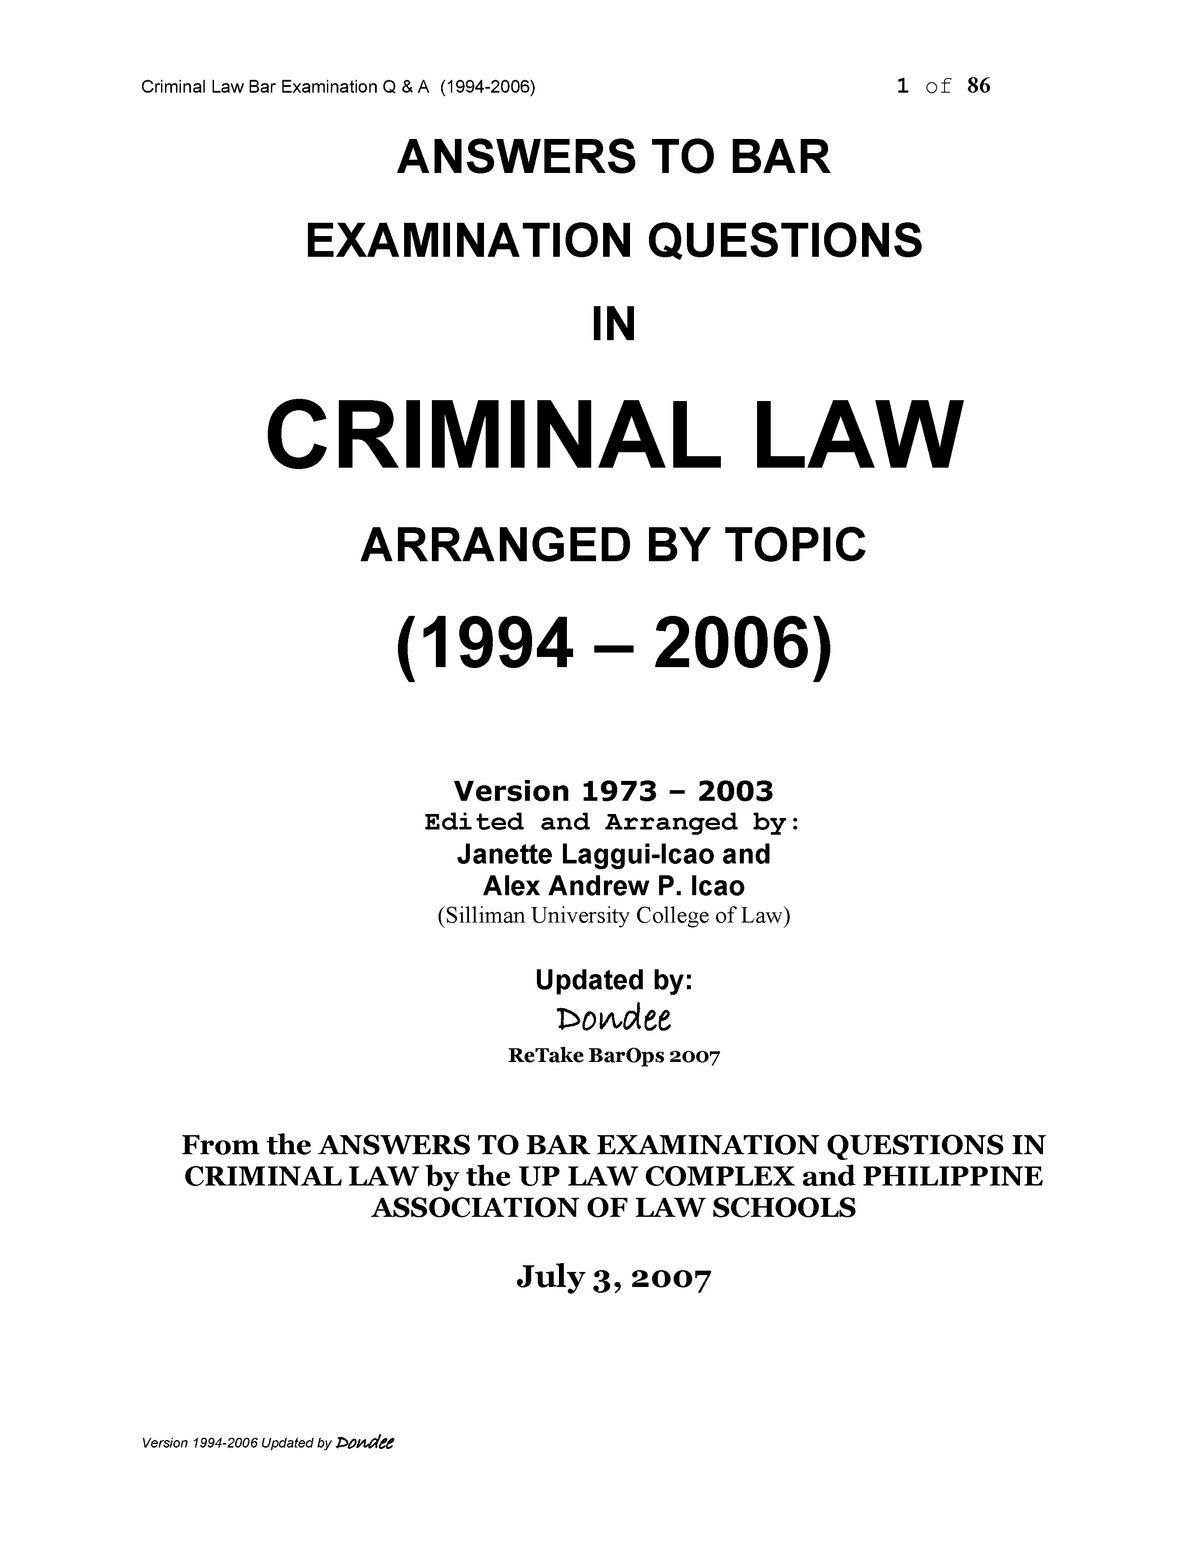 bar exam questions and answers pdf